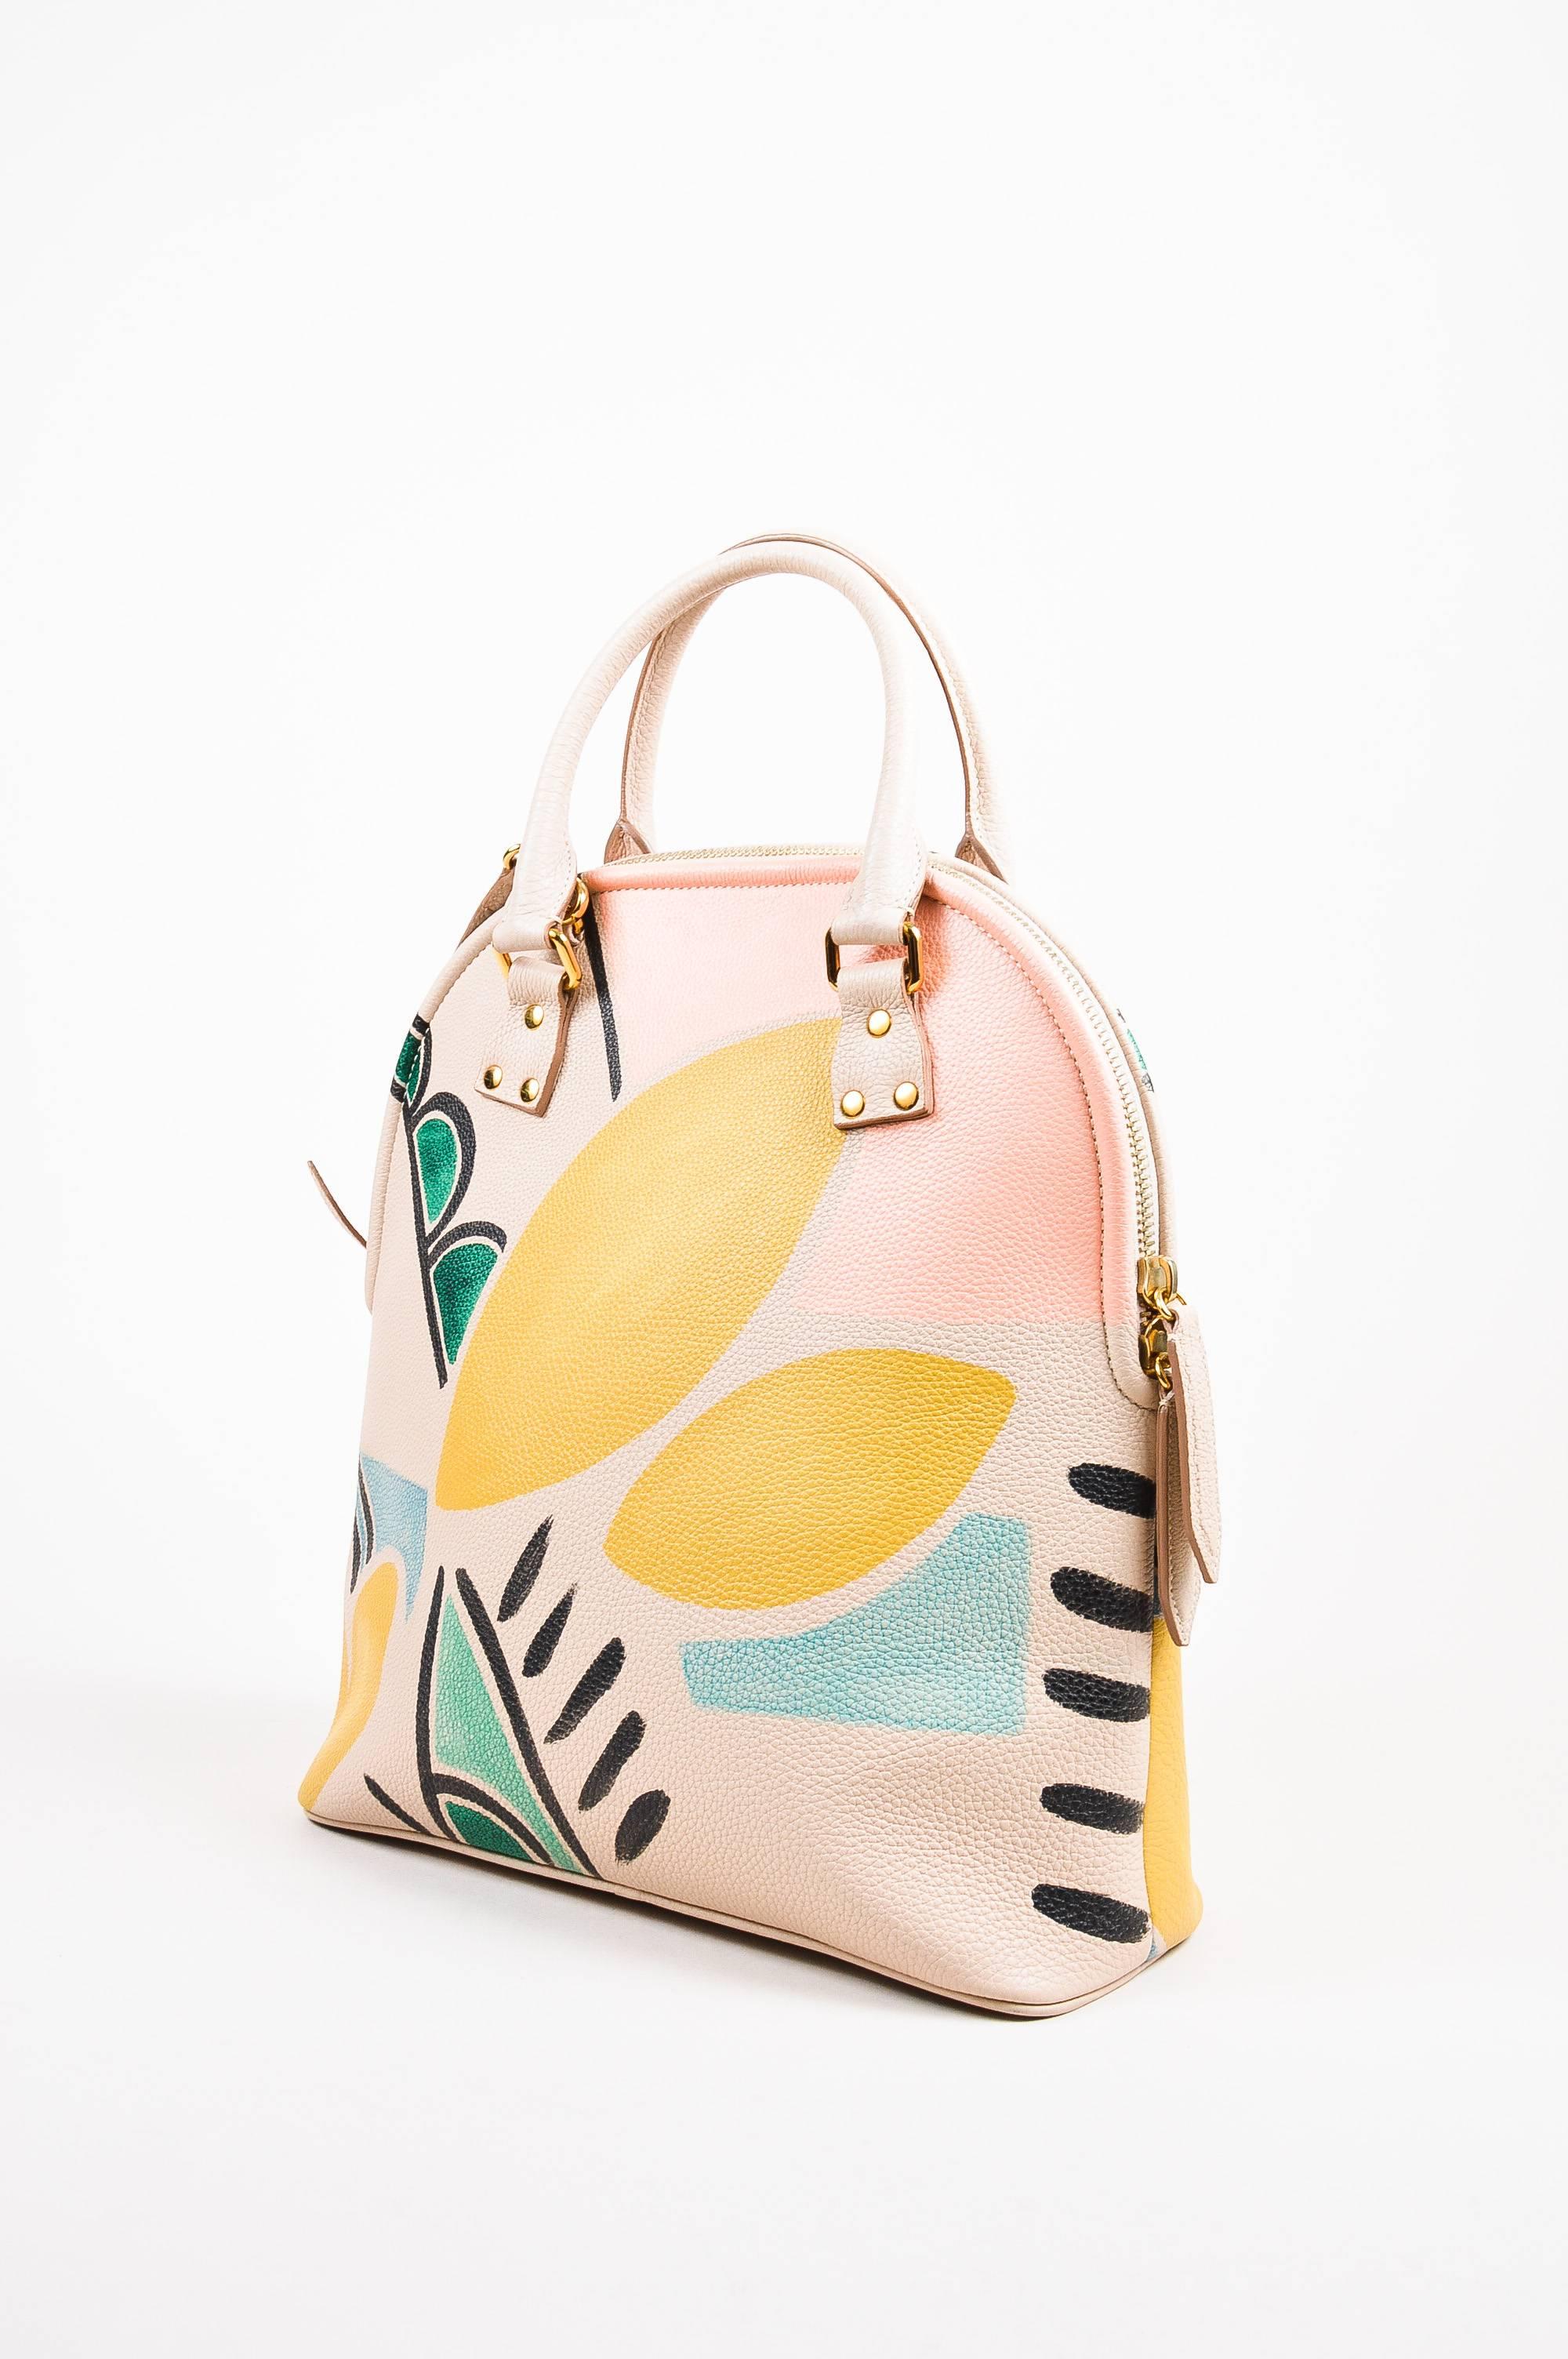 From the 2014/2015 Collection. Retails at $3,995. Beige, pink, green, black, and yellow hand painted pebbled leather 